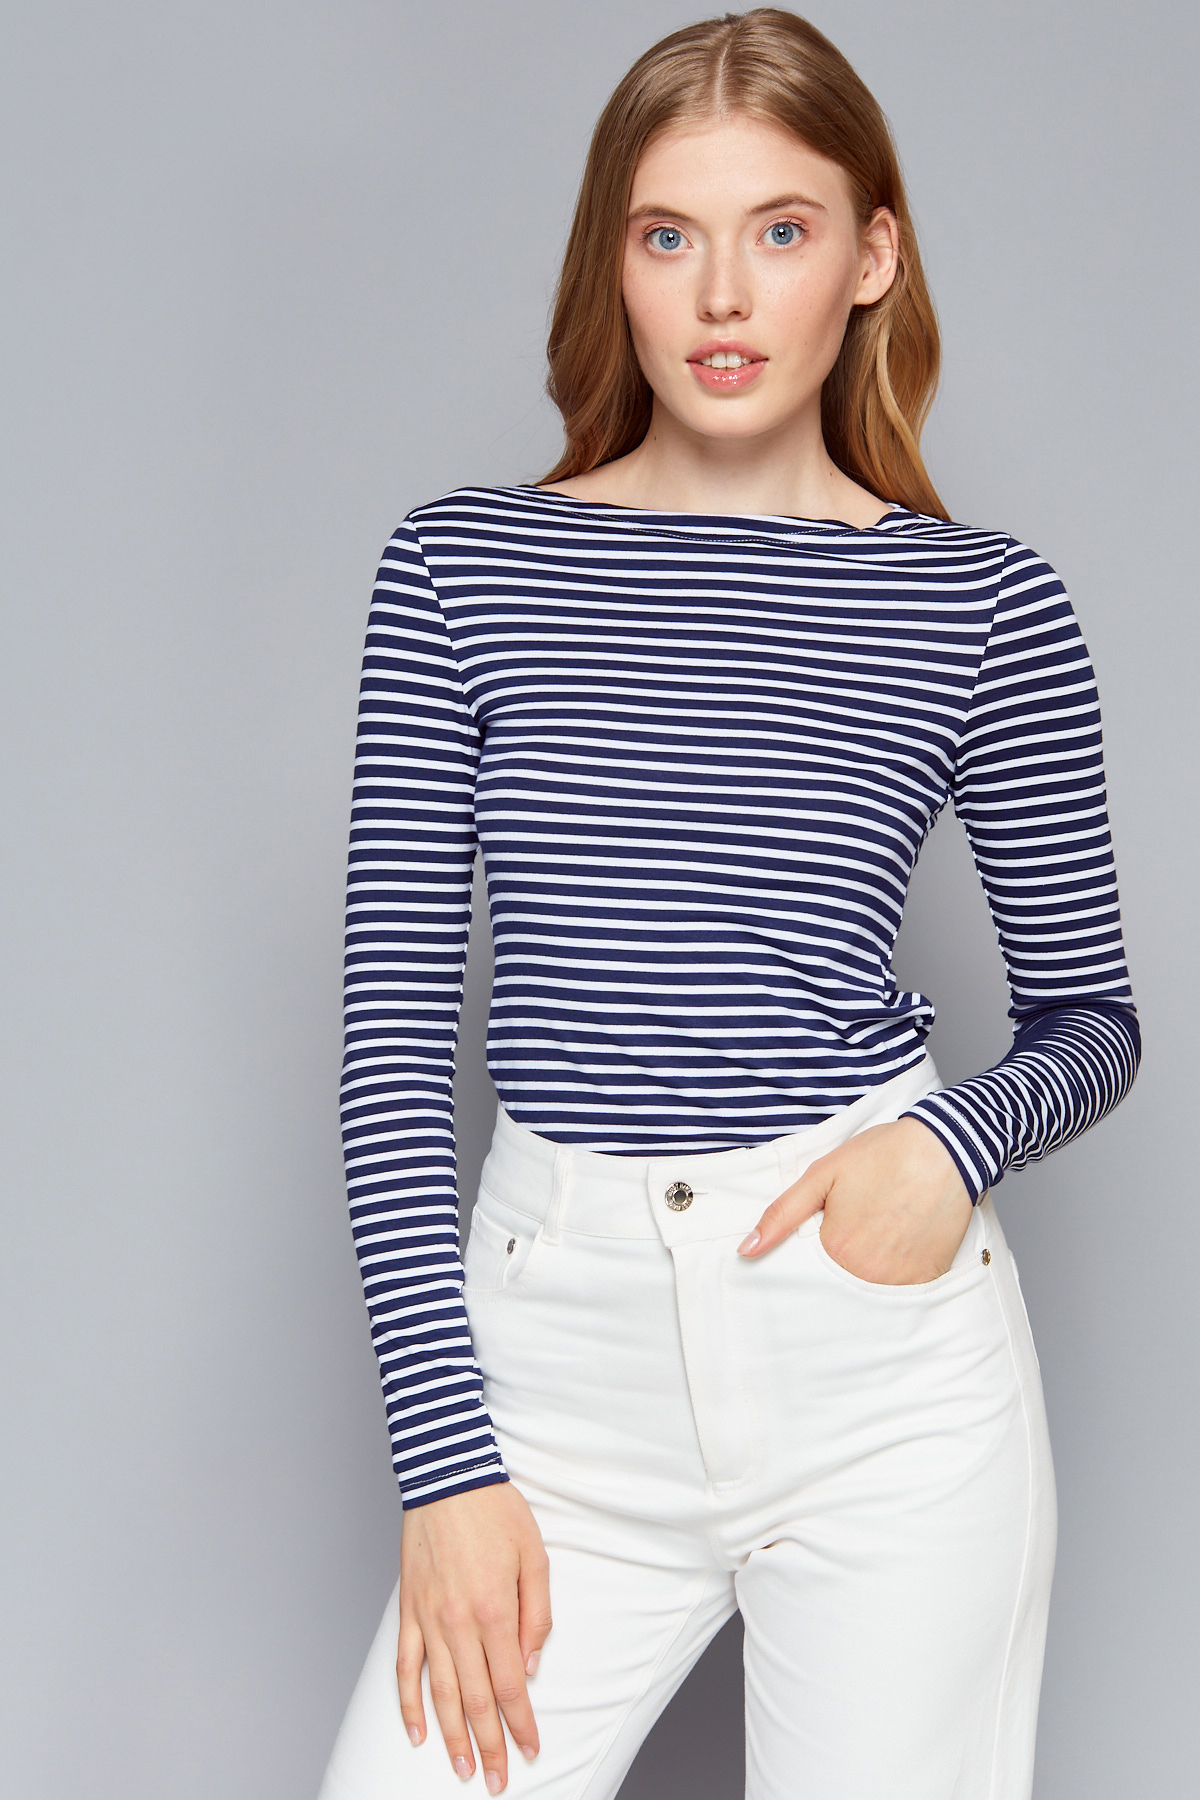 Blue and white striped knit jumper, photo 1